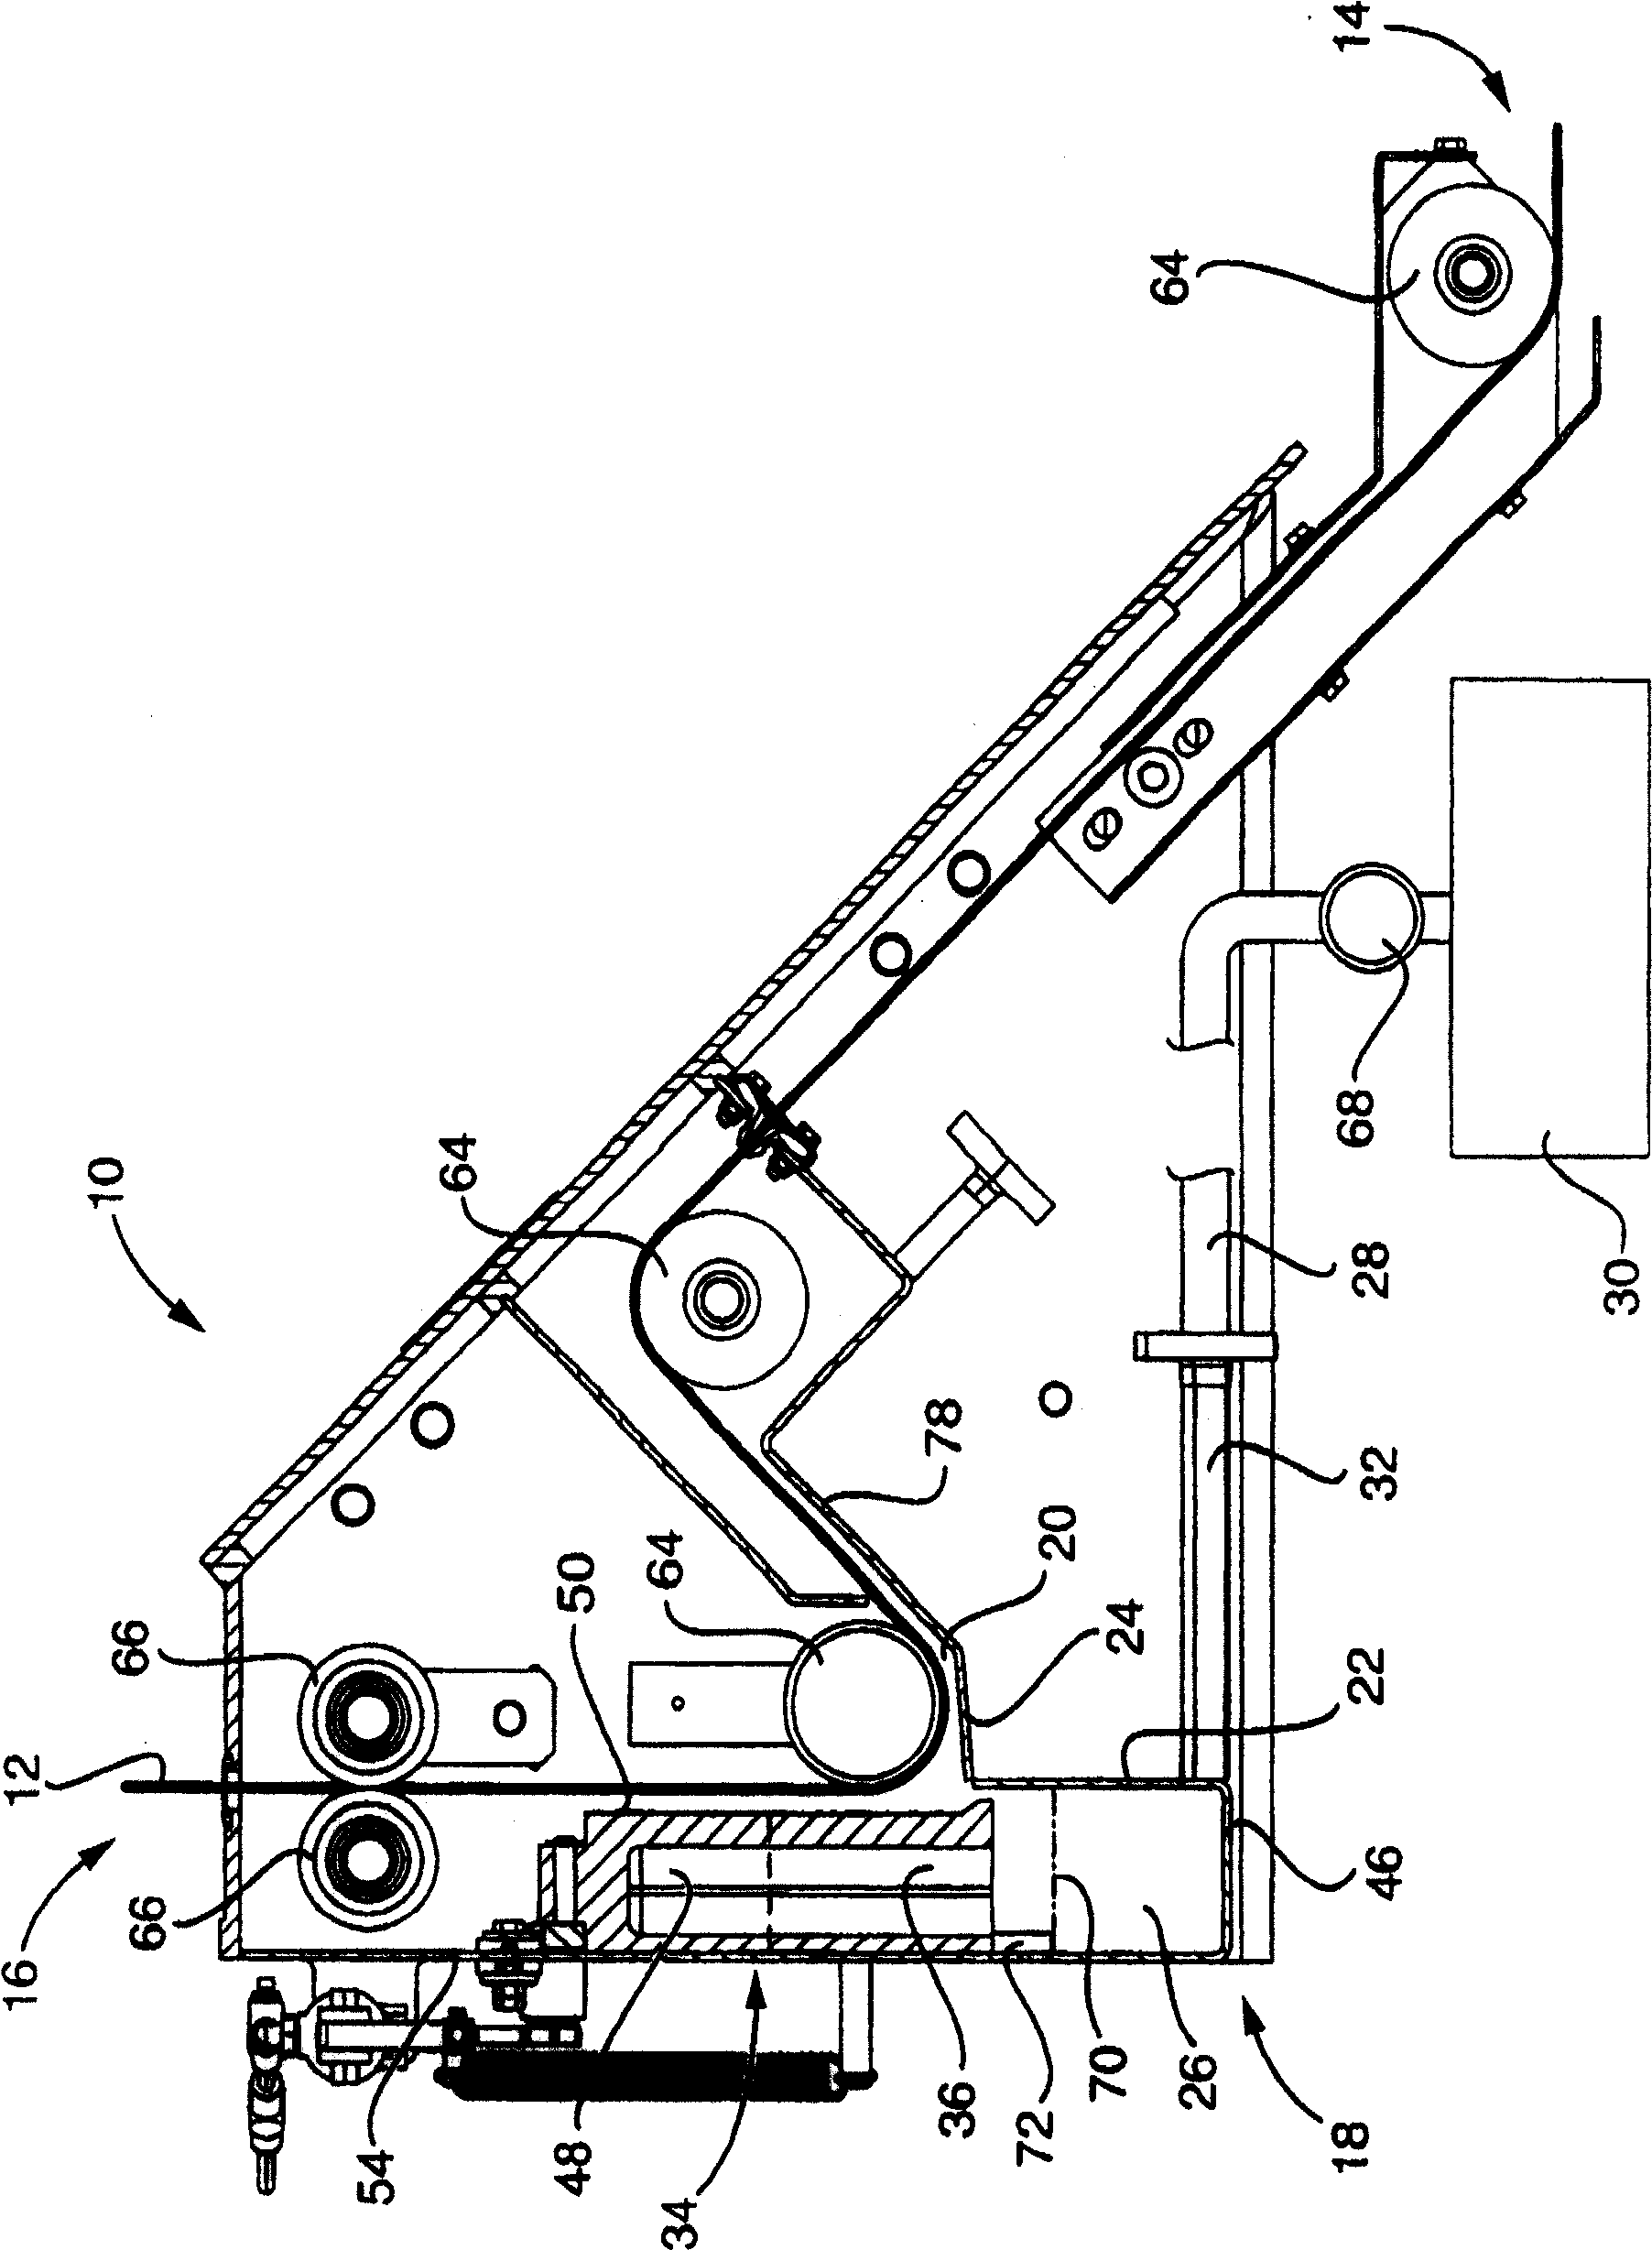 Disinfection apparatus and method thereof